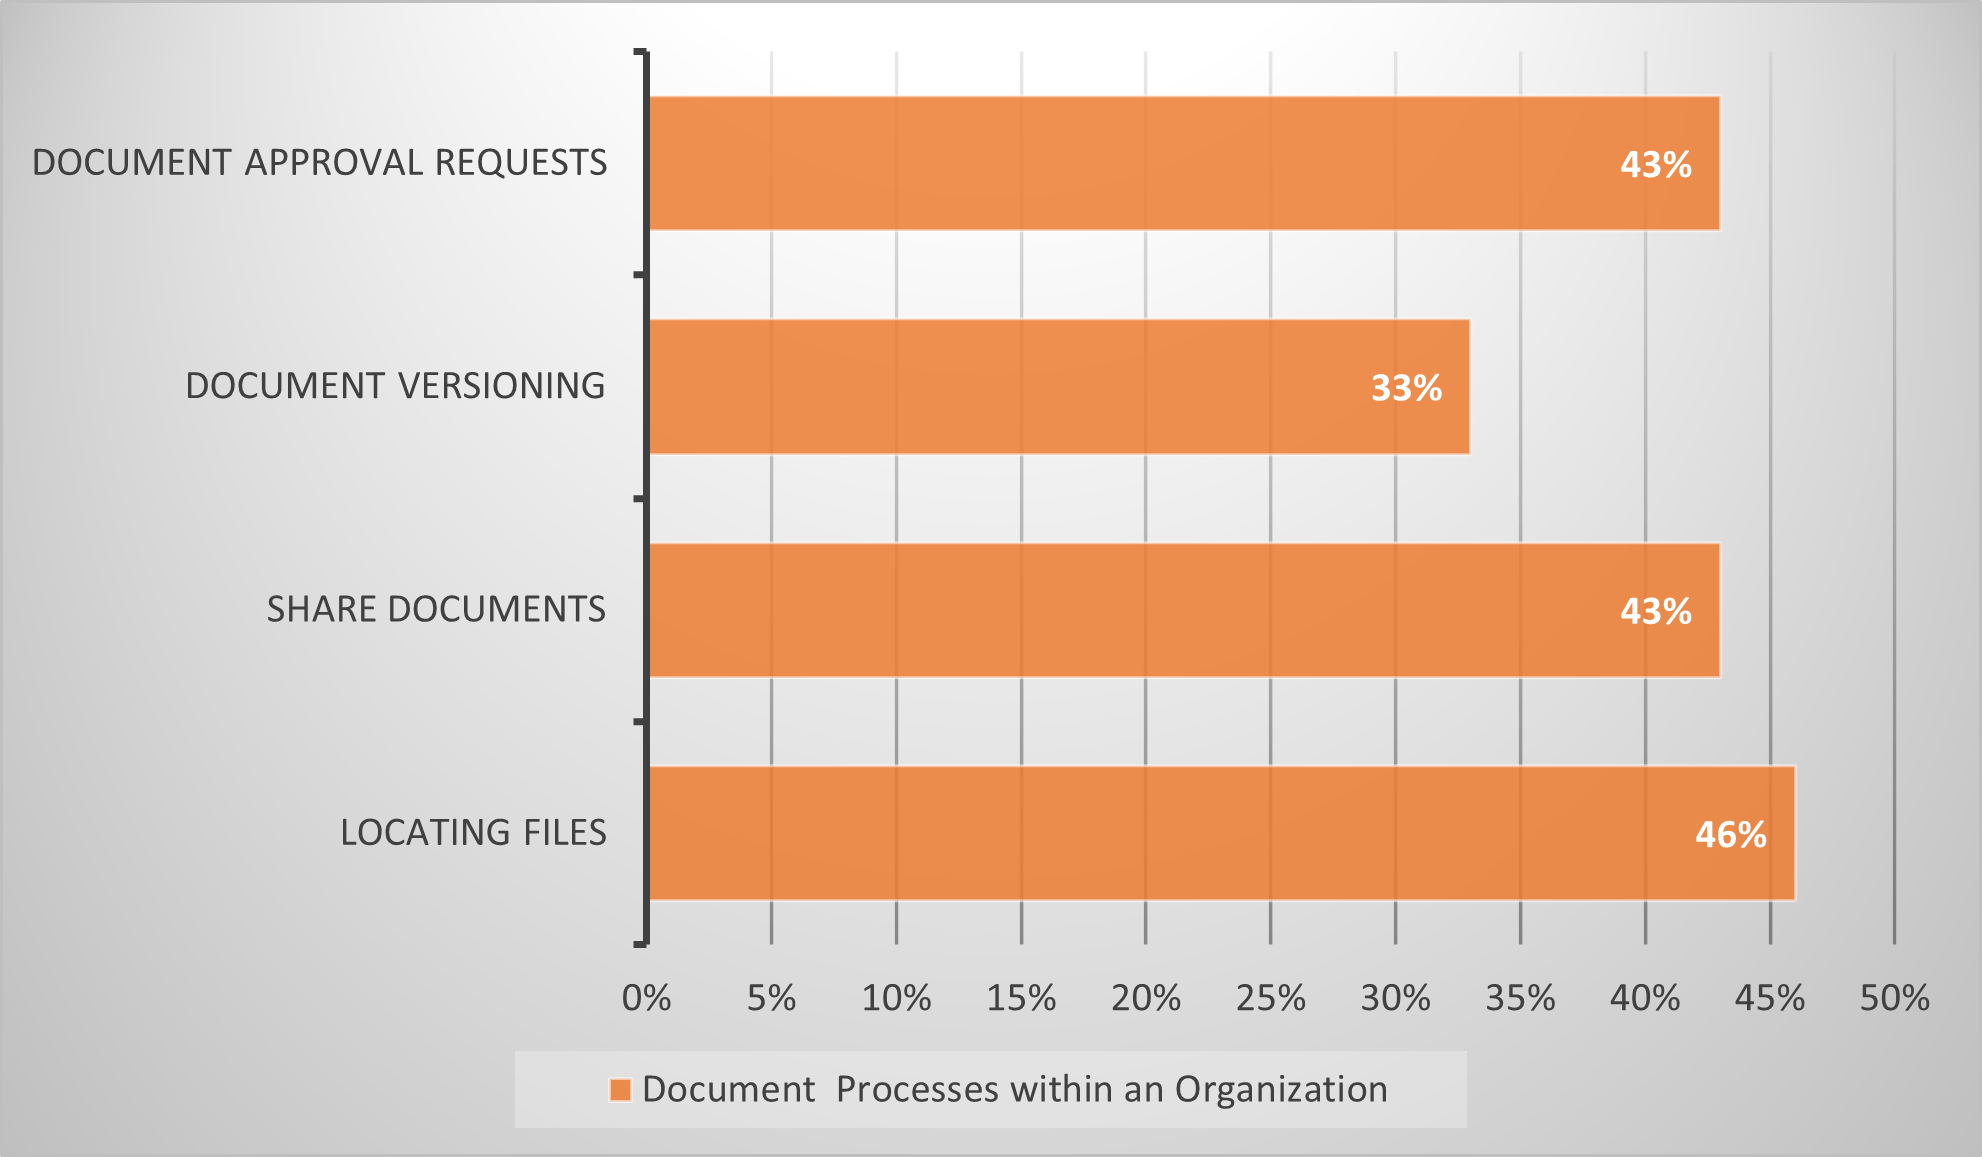 Document Process within an organization